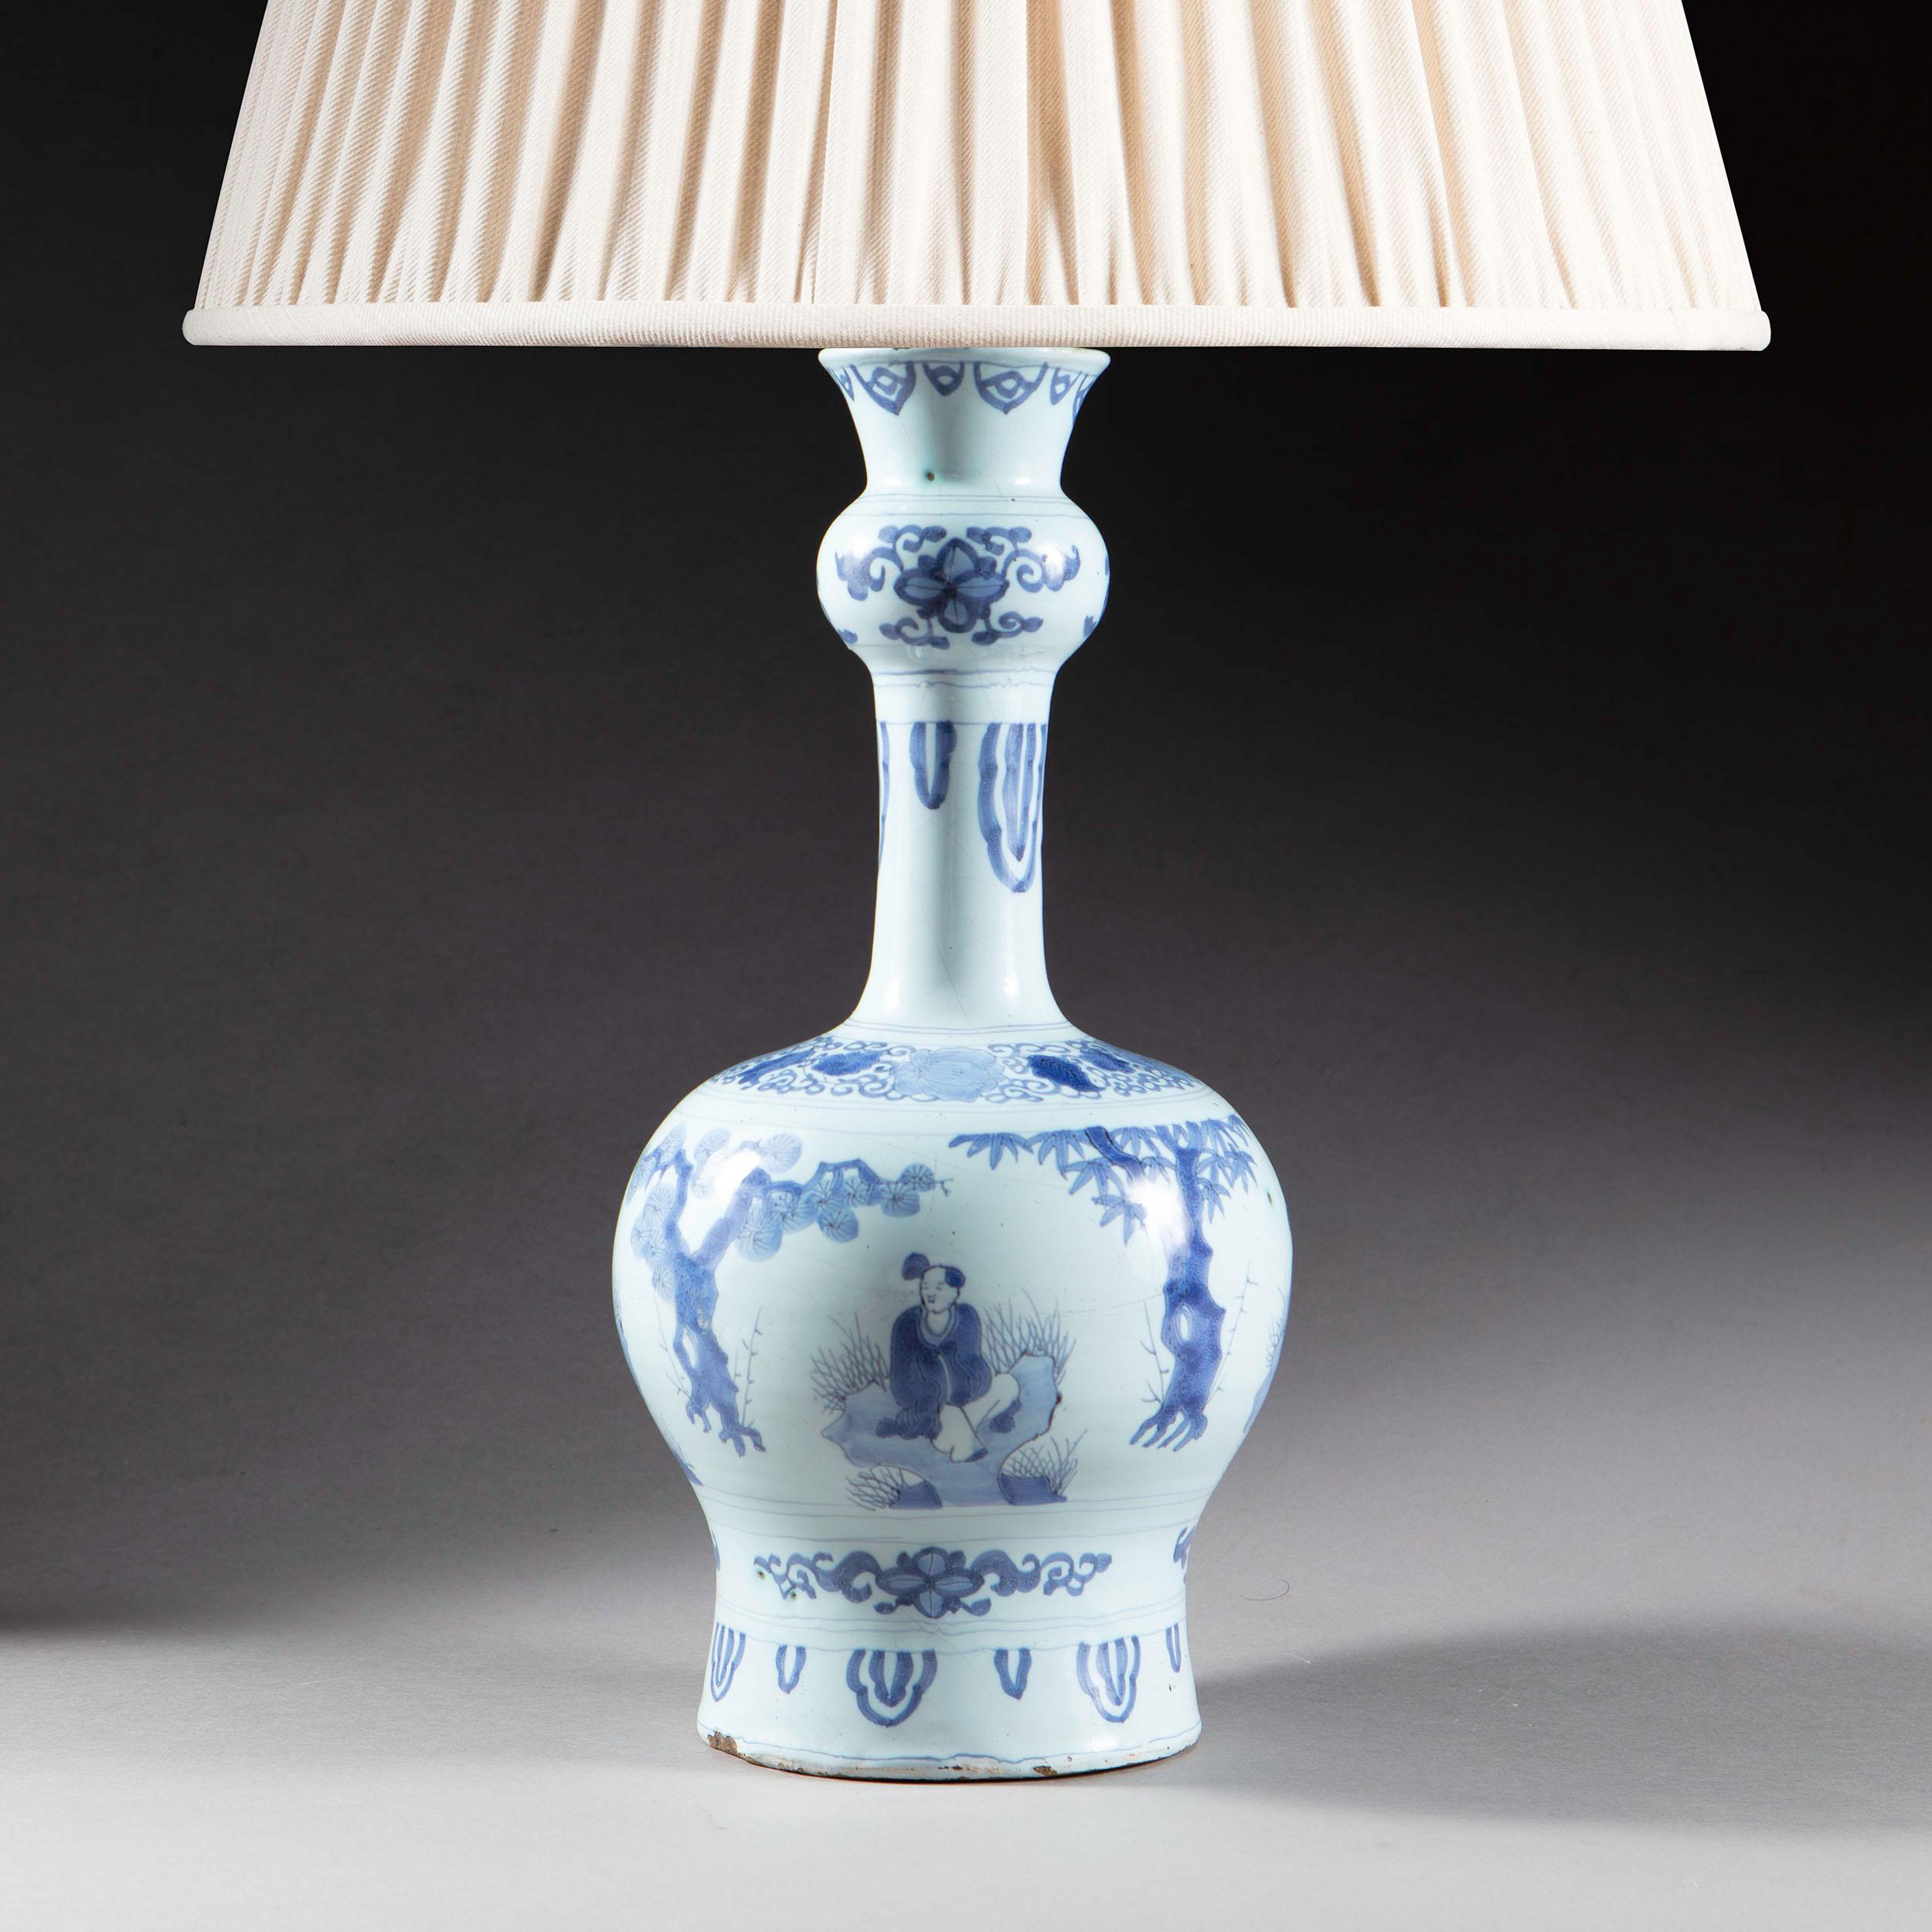 Chinoiserie Pair of early 18th century Dutch Delft Knobble Vases Mounted as Table Lamps